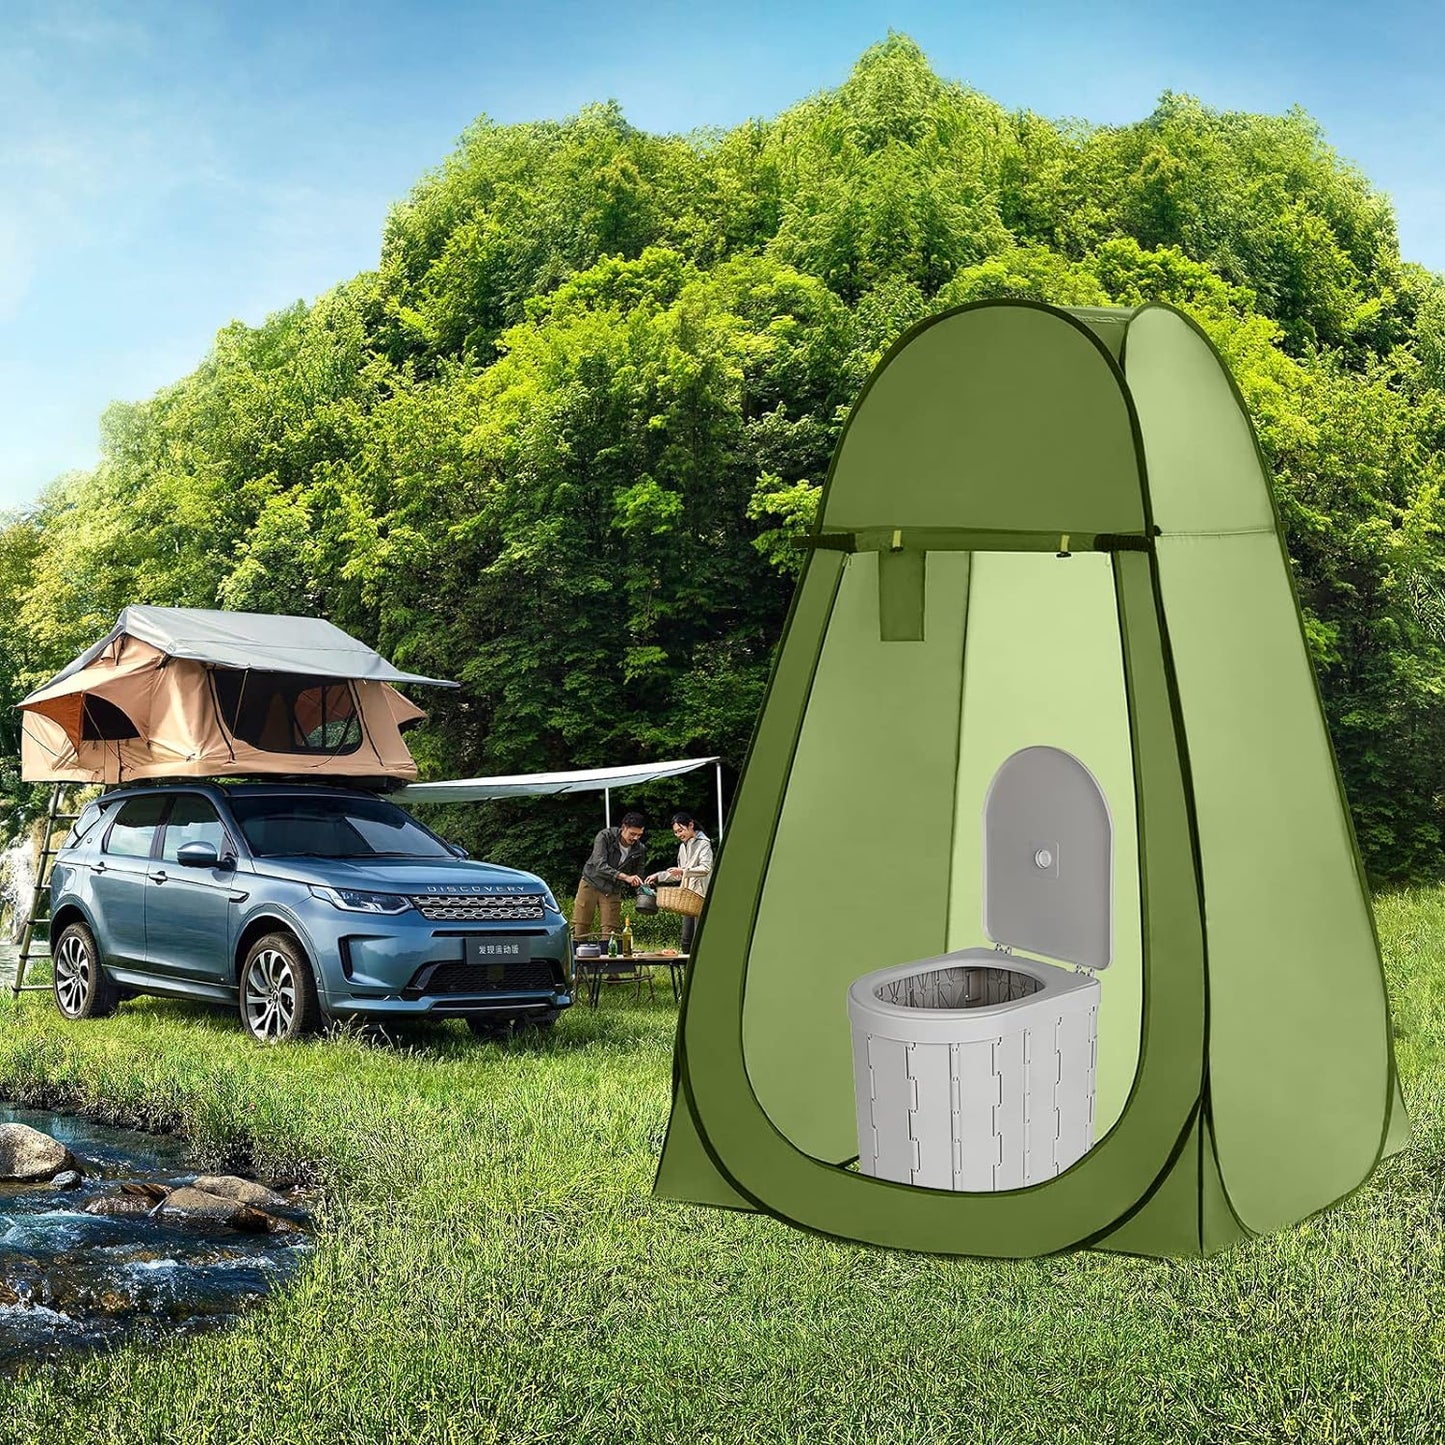 Portable Toilet and Privacy Tent for Adults, Pop up Potty Tent Outdoor Portable Toilet for Camping with 15 Toilet Bags, Mat, Pop-Up Tent for Toilet, Travel, Changing (Green)